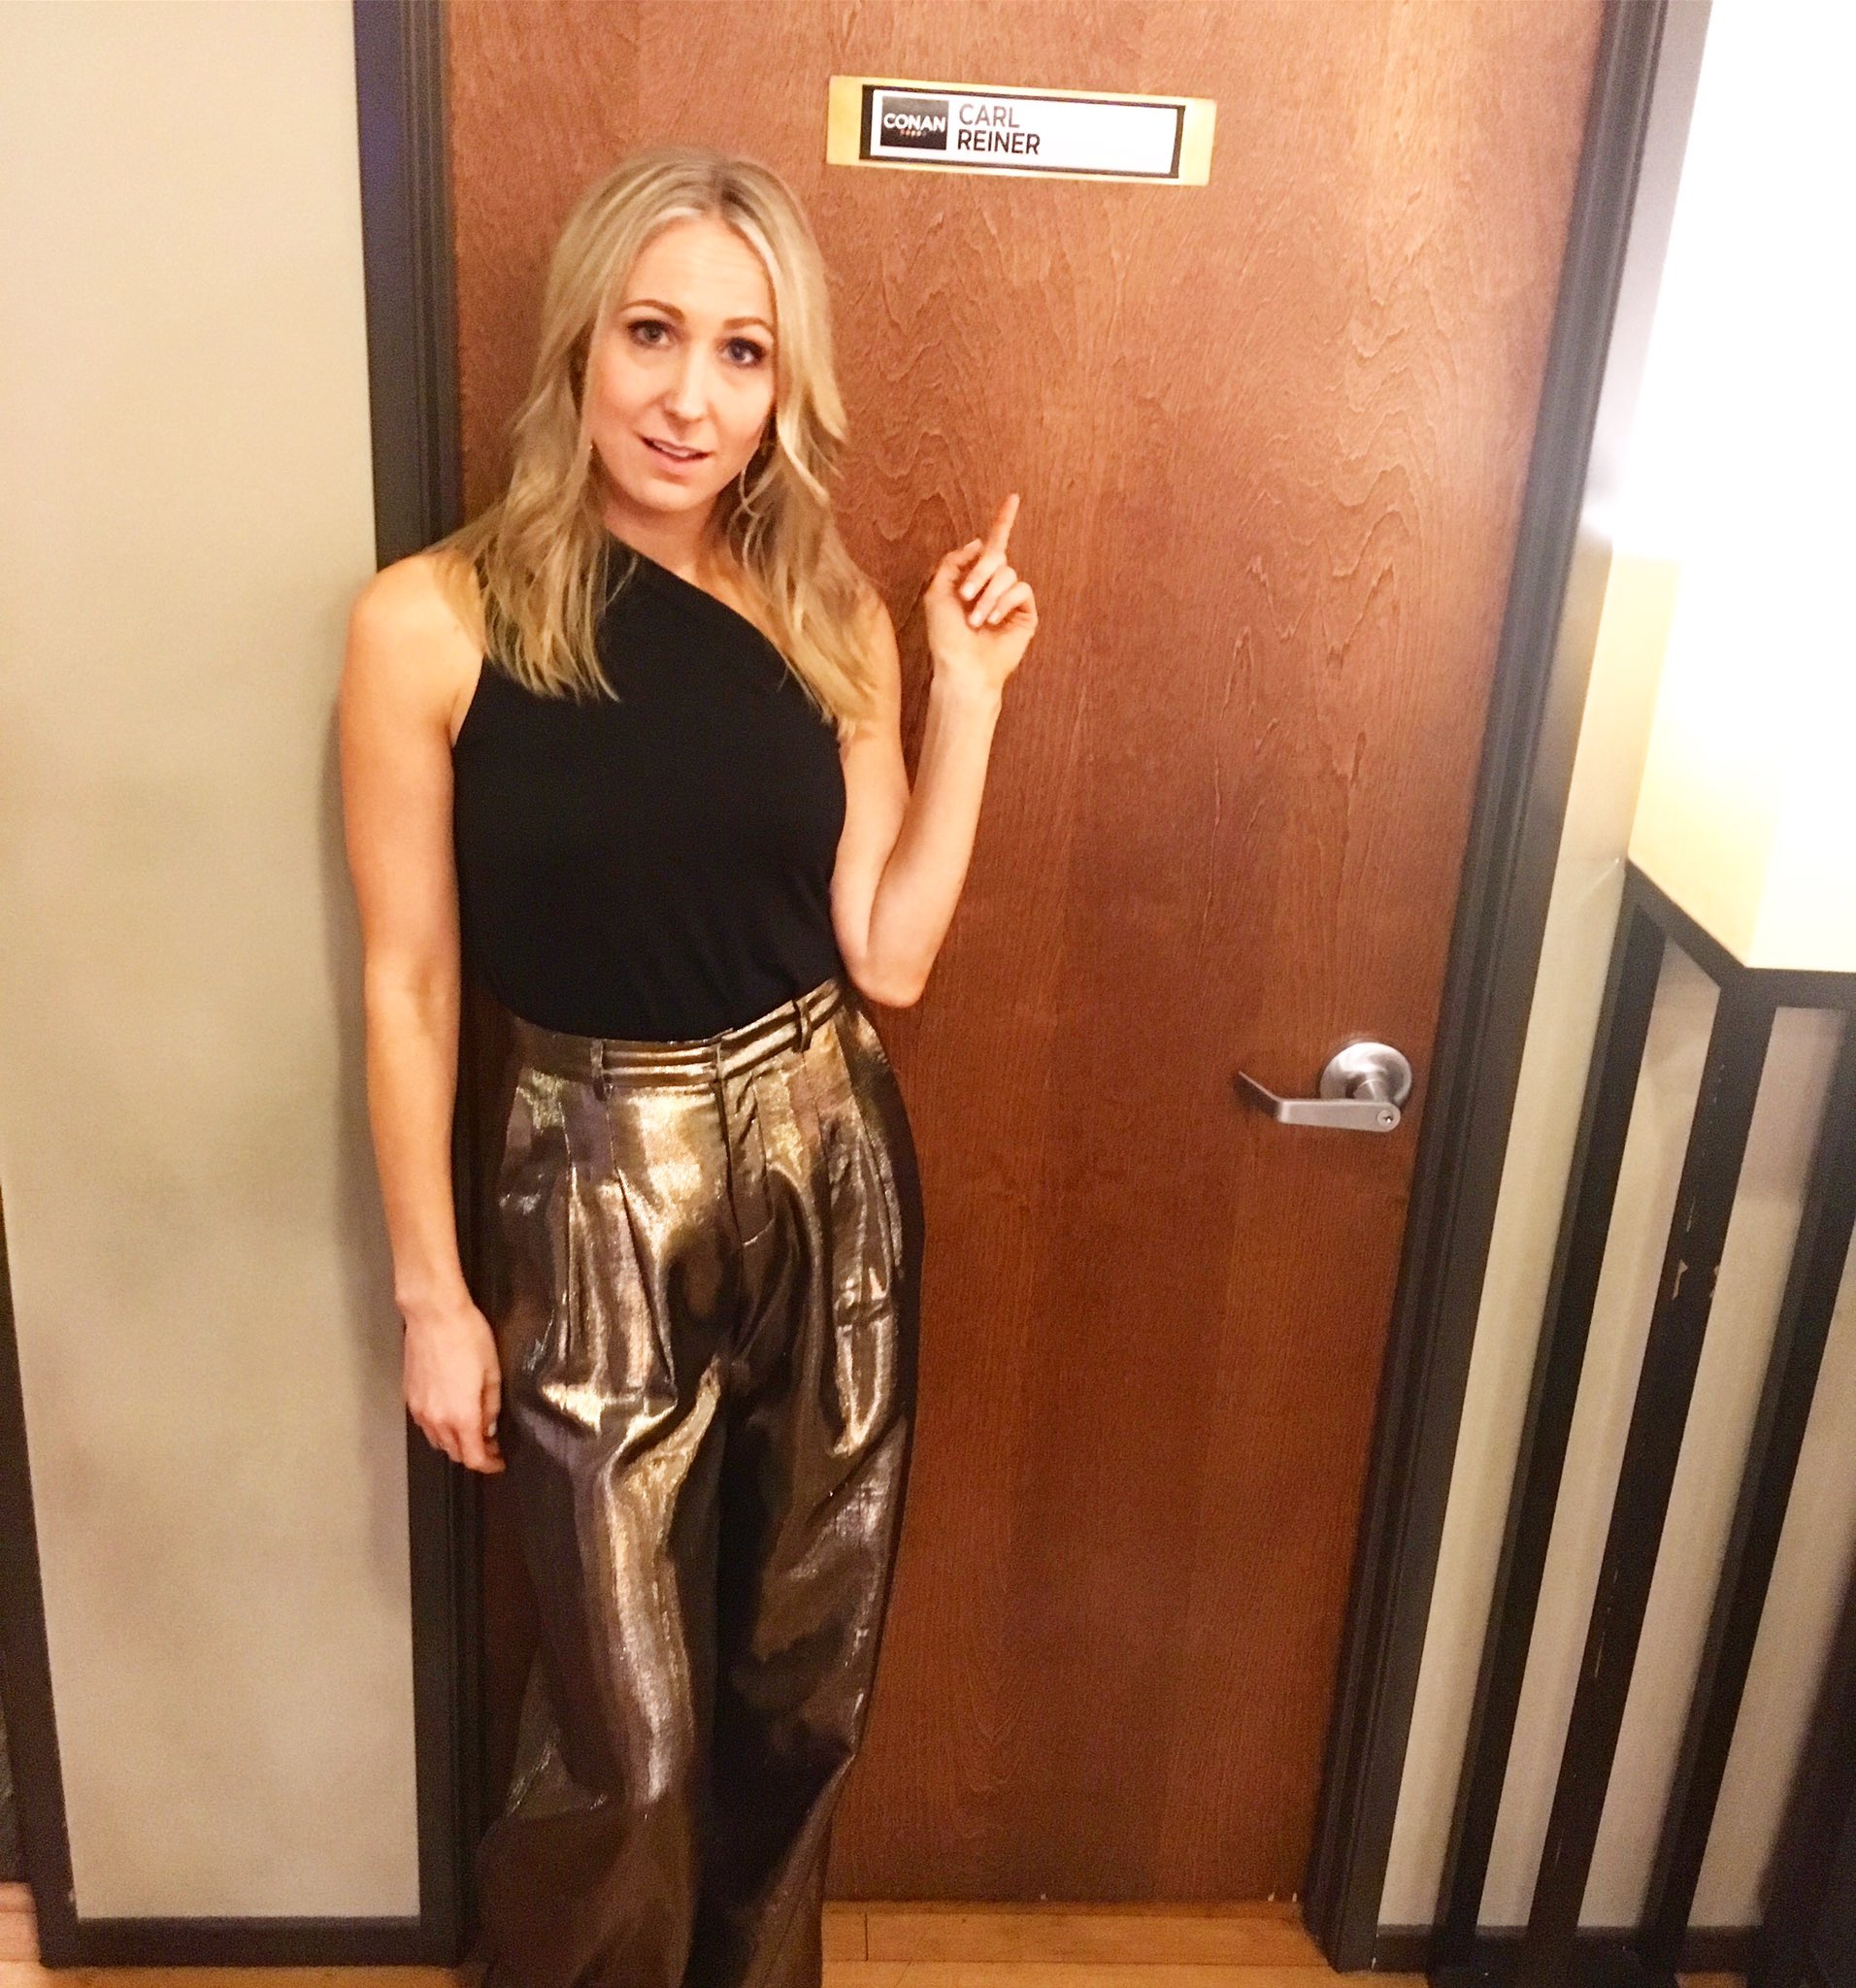 Nikki Glaser on Twitter: "I'm on @TeamCoco tonight! Tonight!!  https://t.co/fXL8pD2N8s" / Twitter